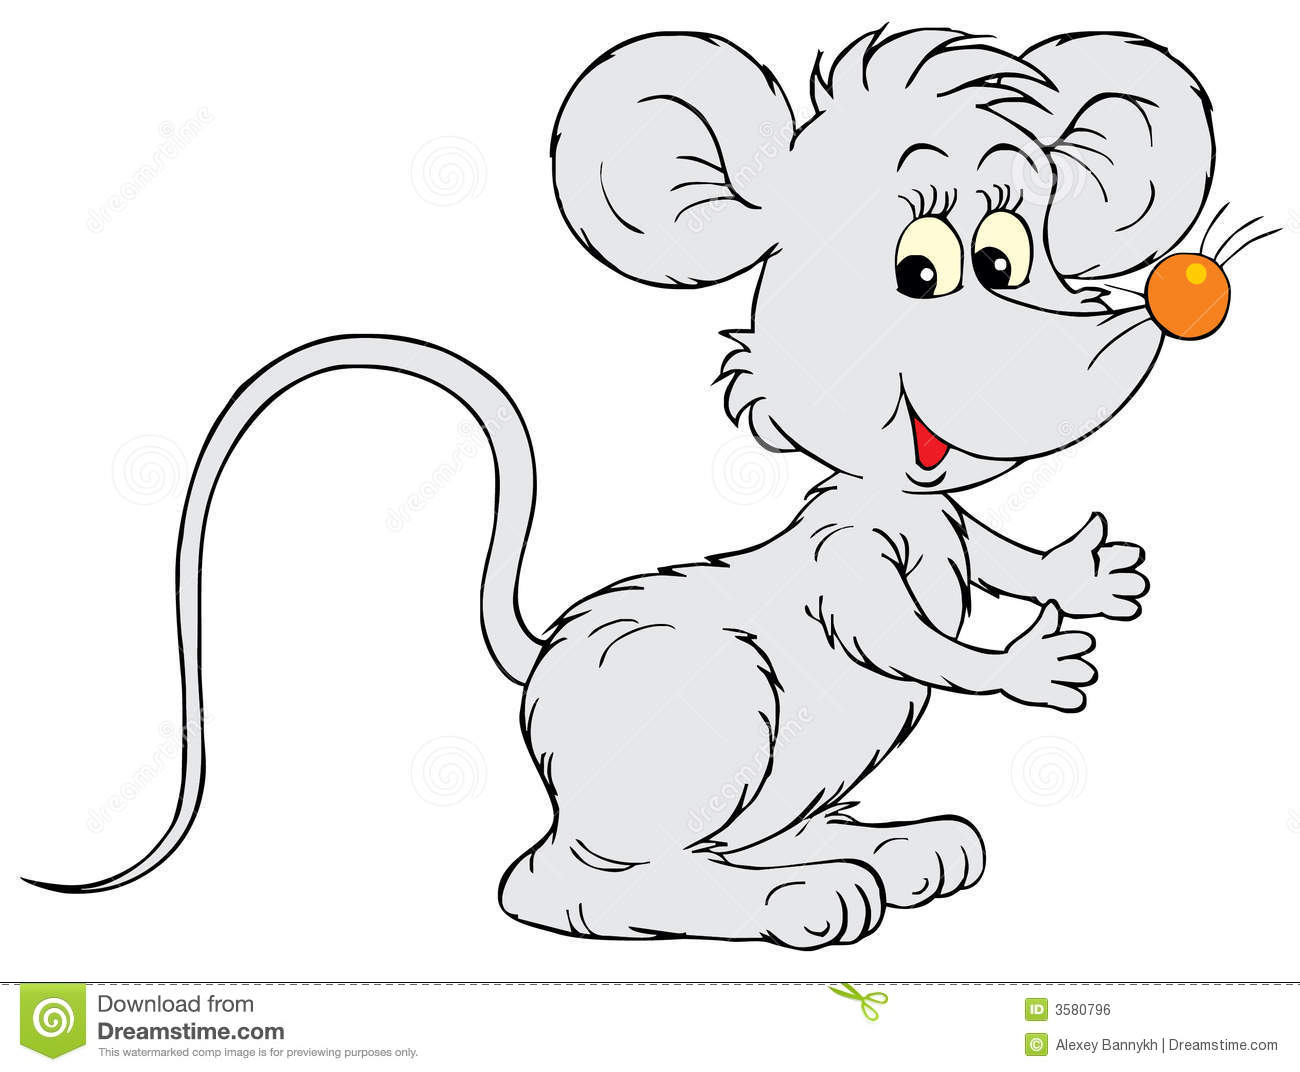 Mouse  Vector Clip Art  Royalty Free Stock Image   Image  3580796